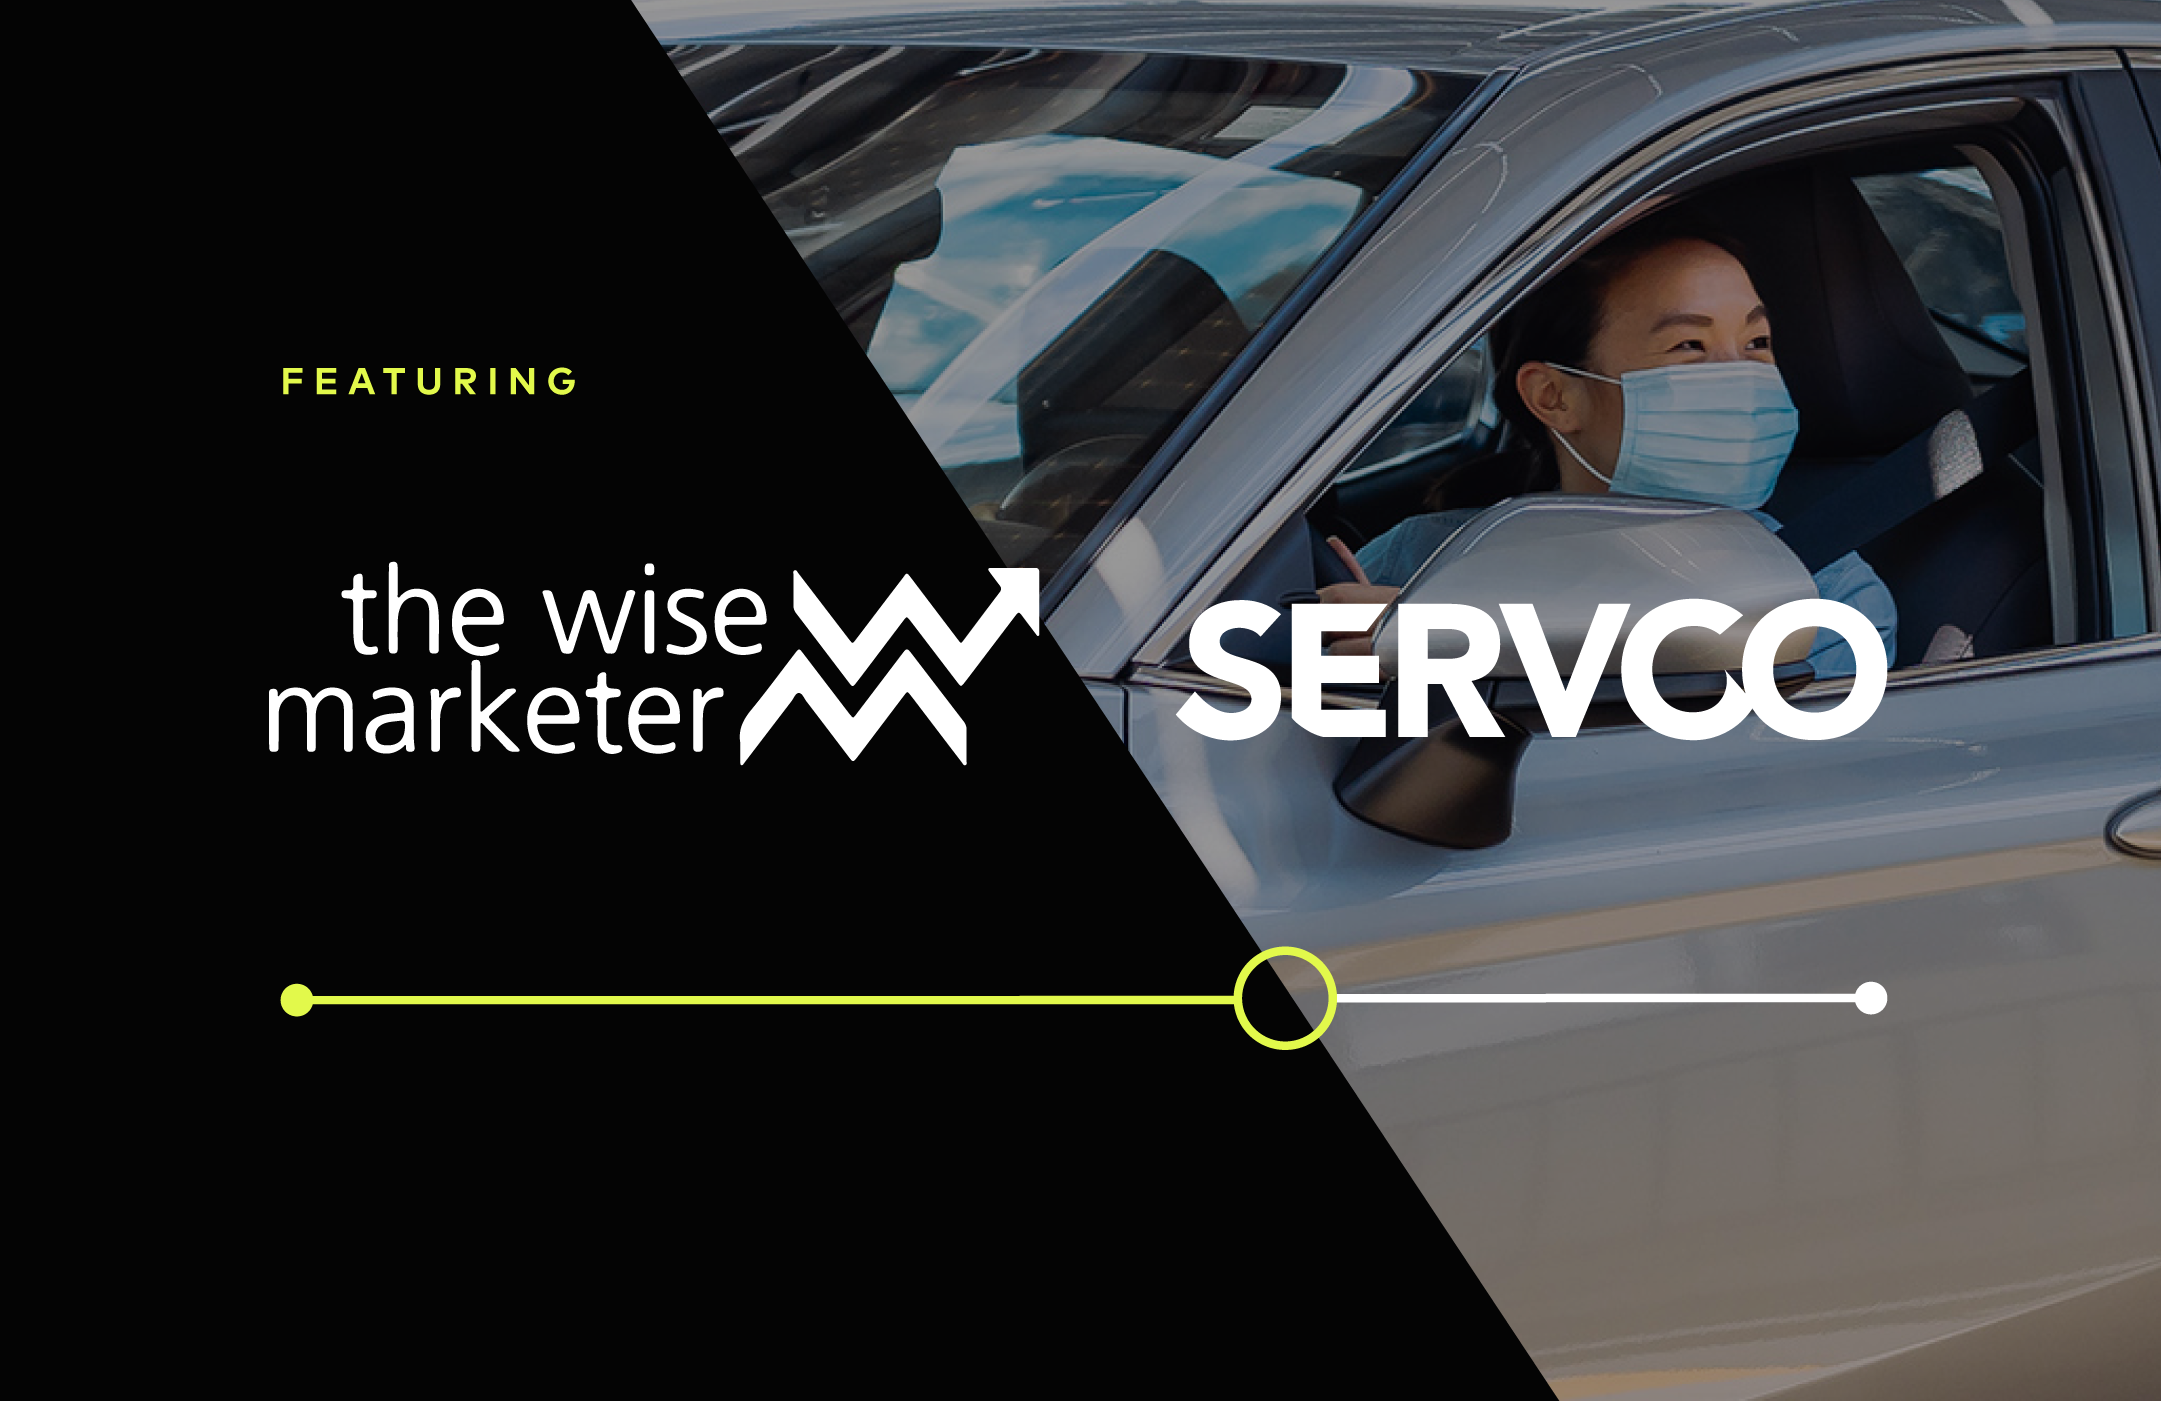 Woman driving a car while wearing a mask beneath Wise Marketer and Servco logos